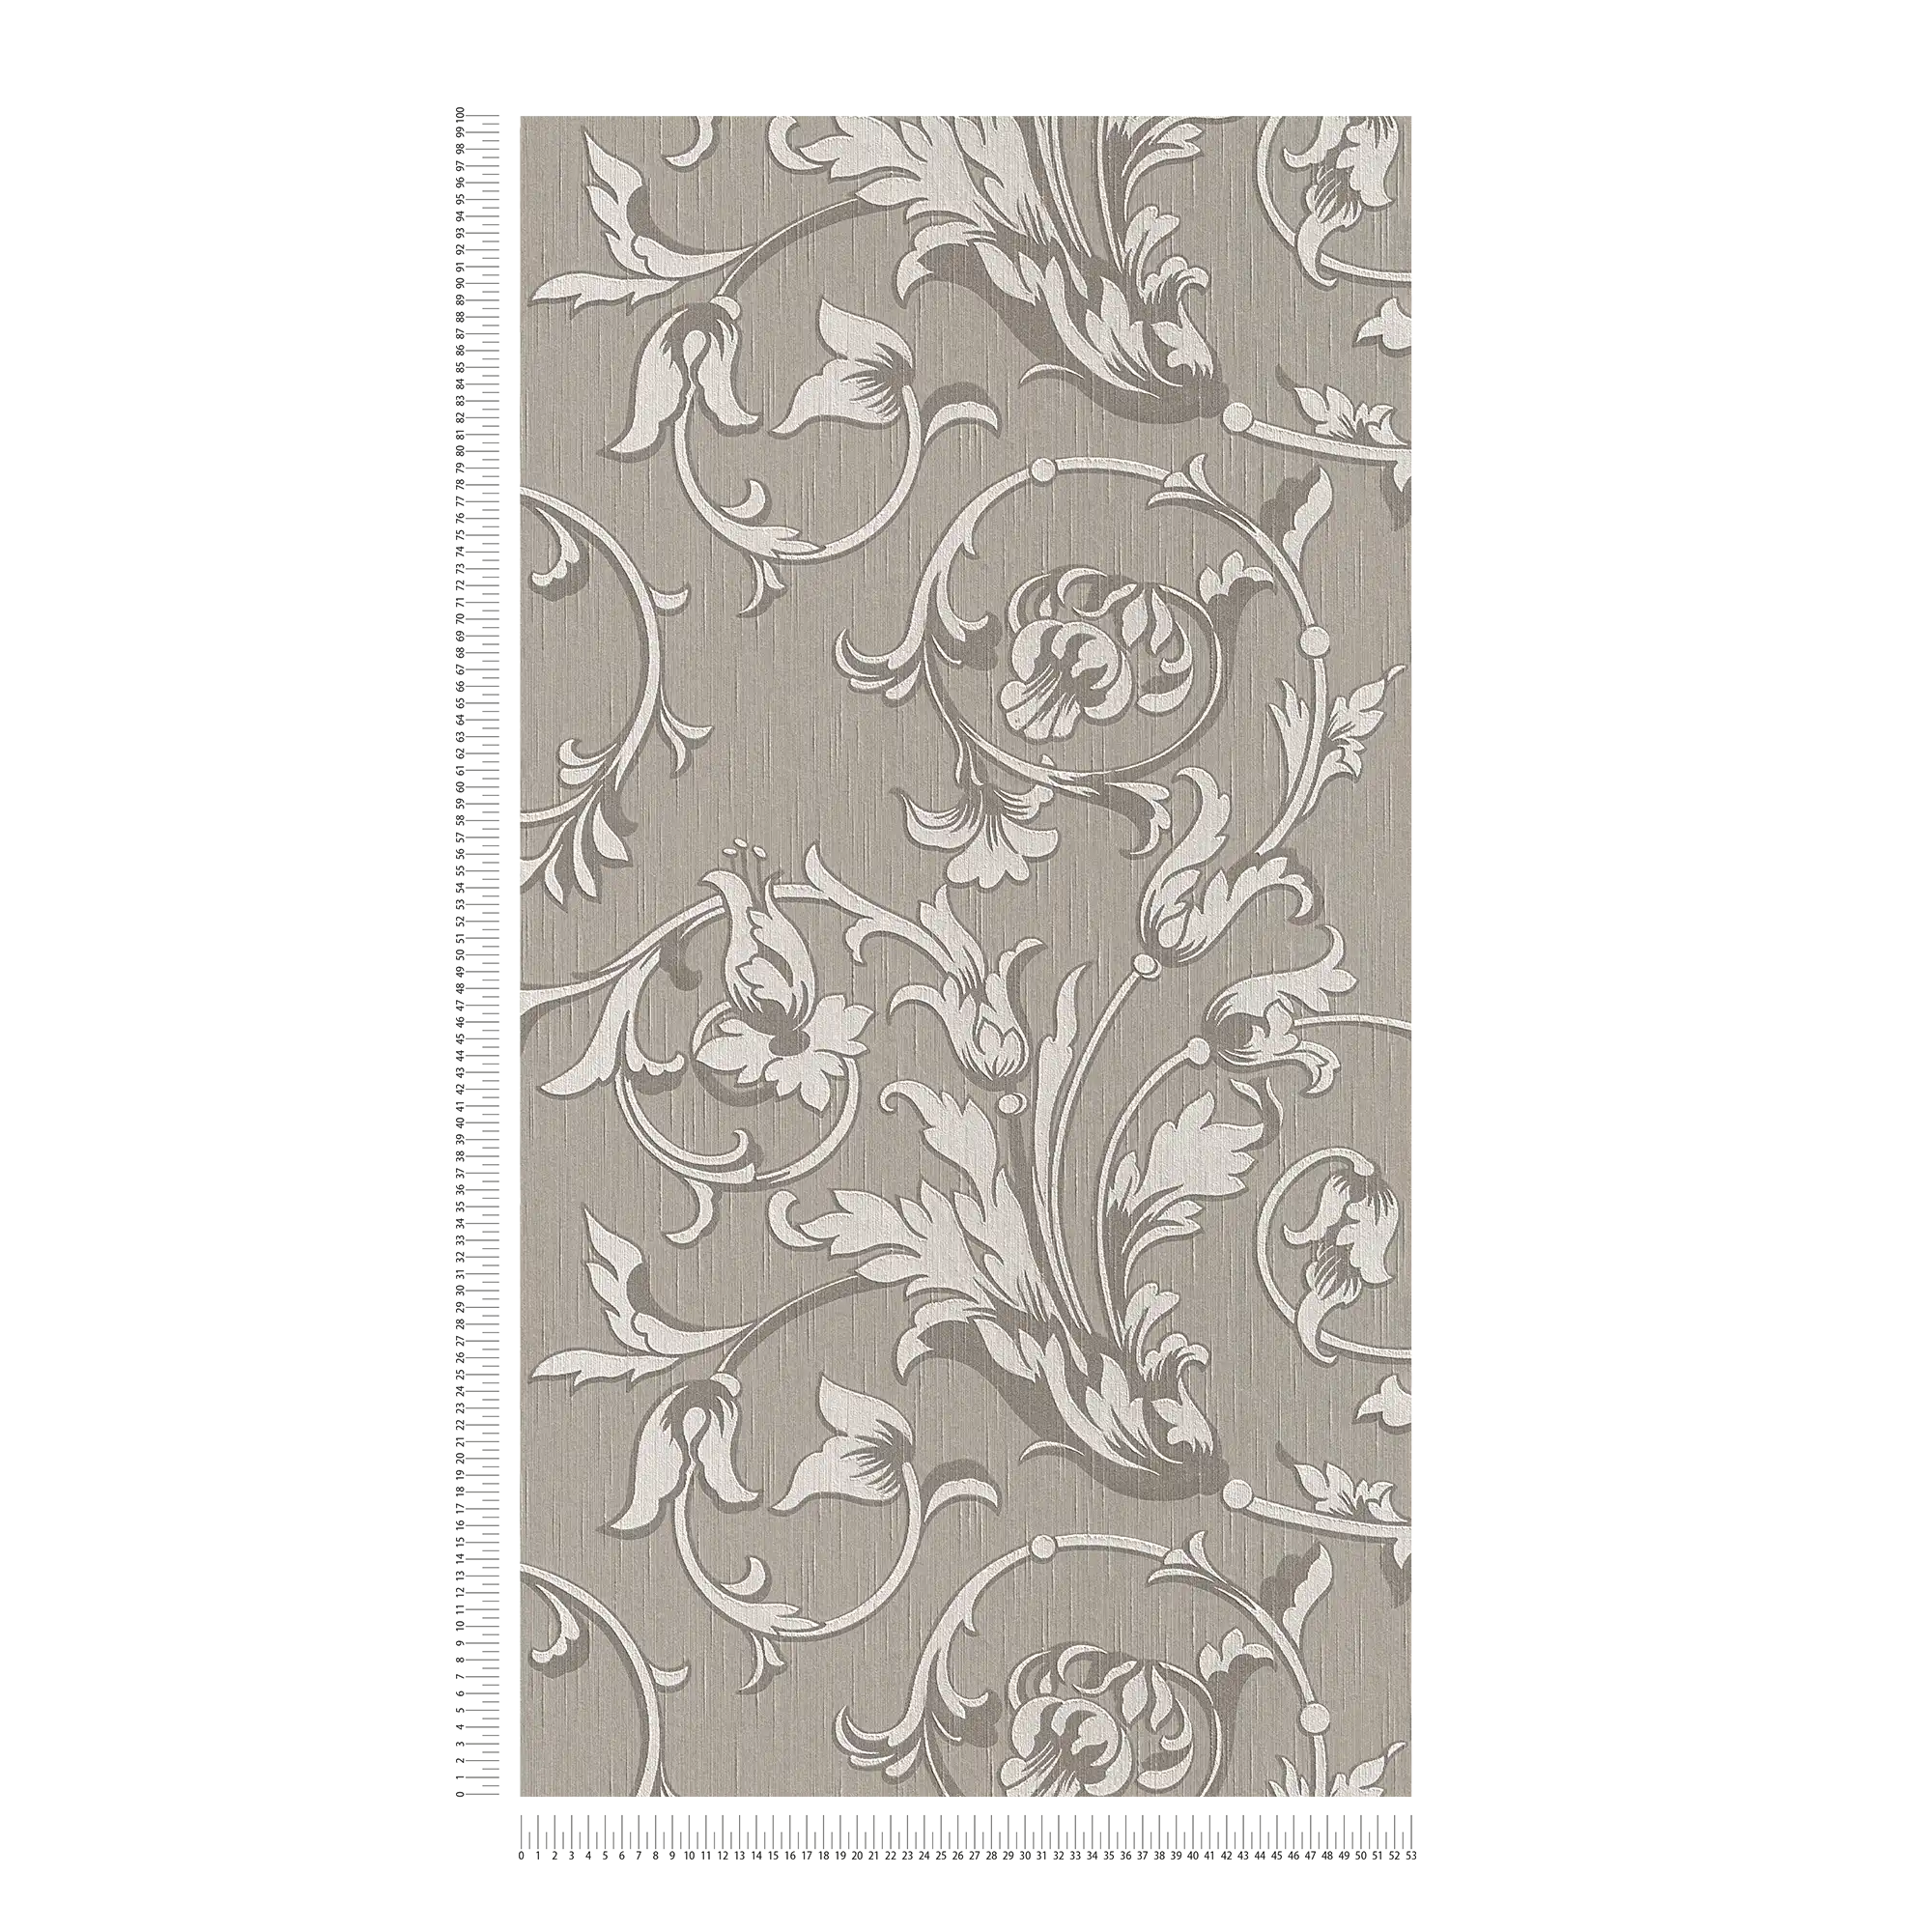             Colonioal style wallpaper with floral ornaments - brown, grey
        